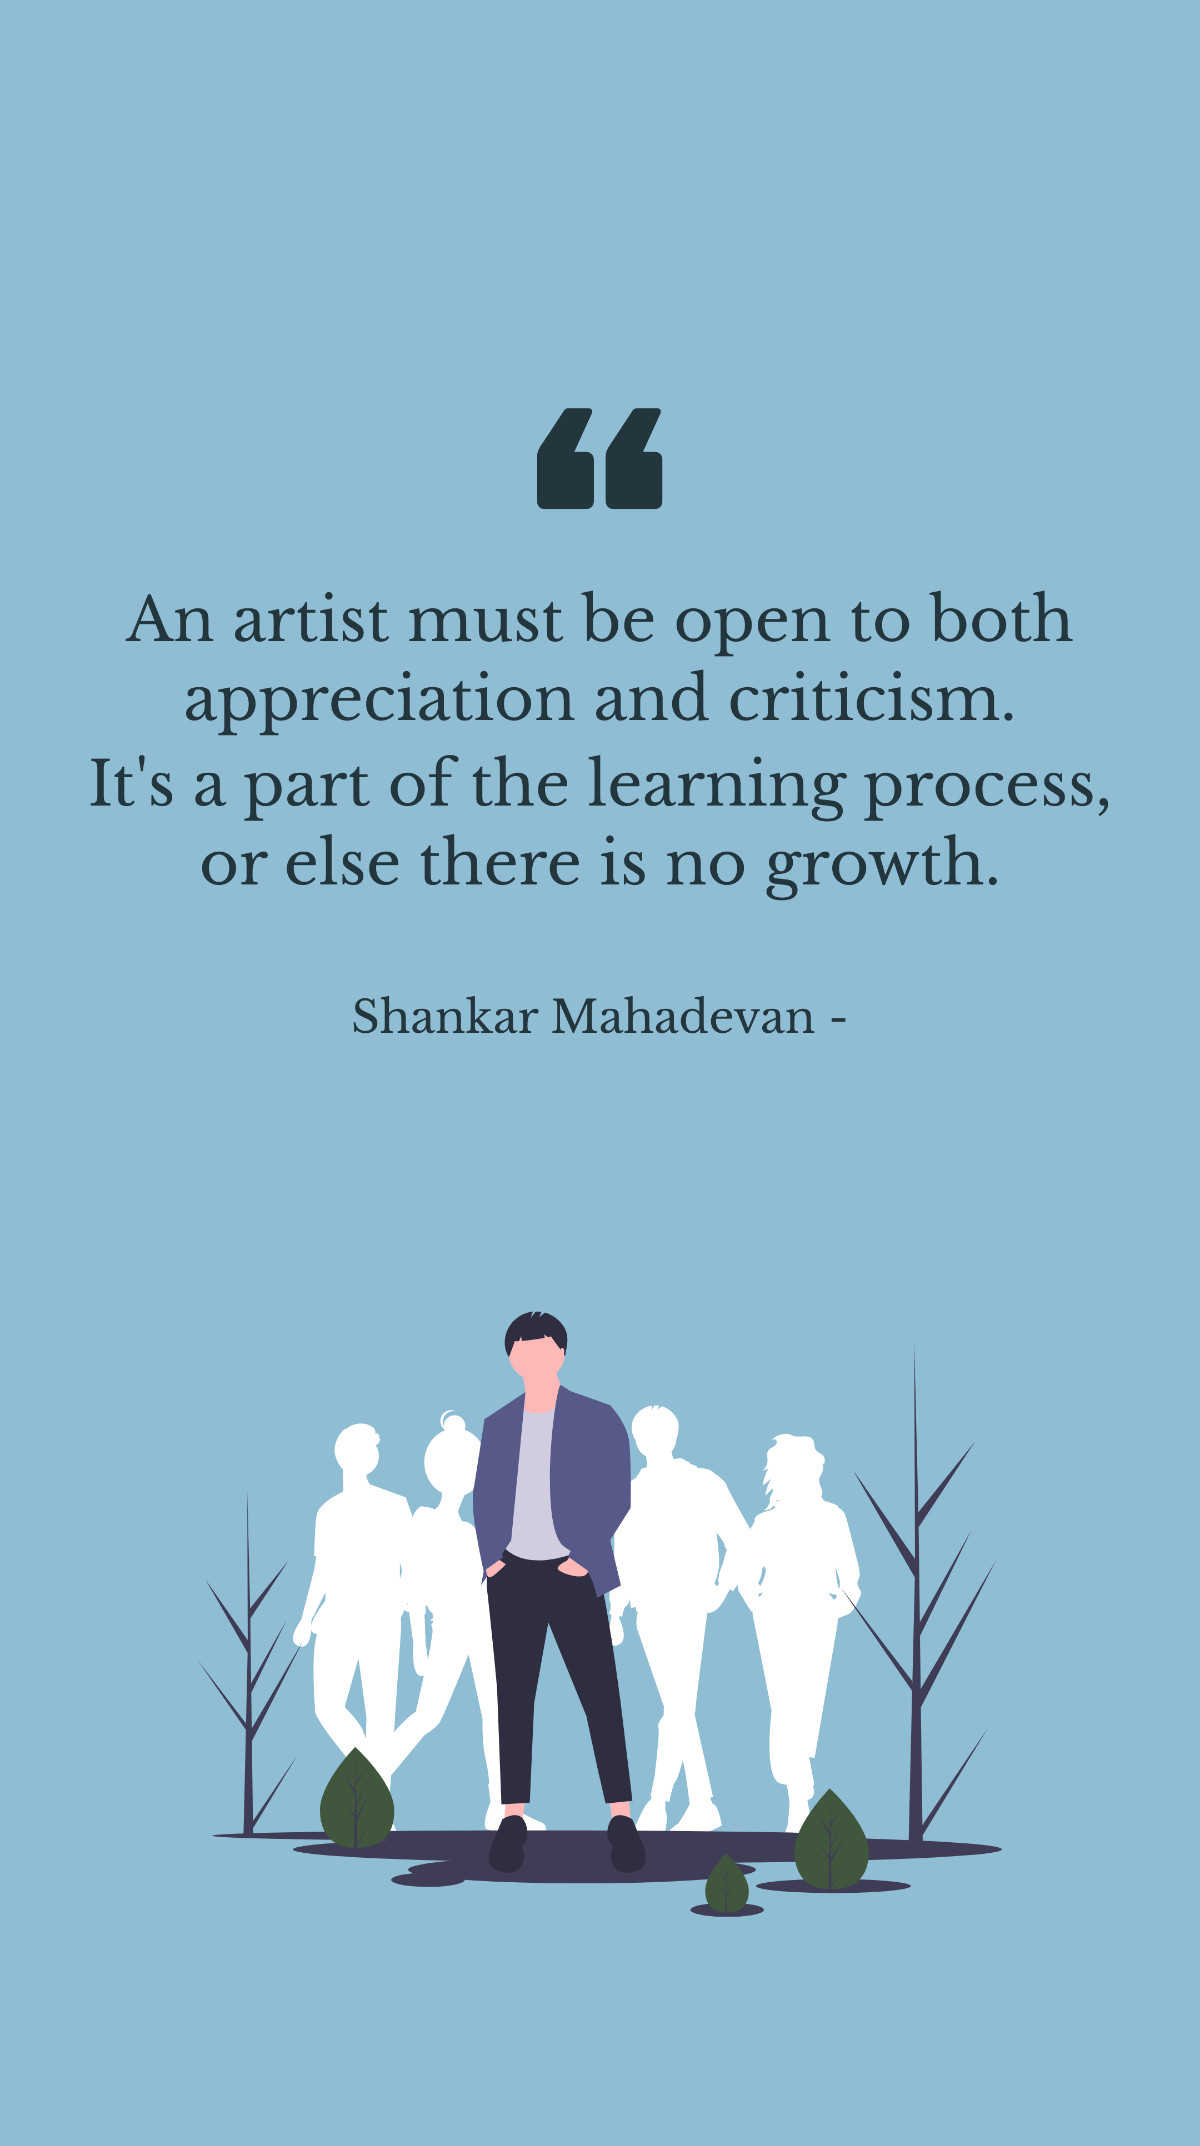 Shankar Mahadevan - An artist must be open to both appreciation and criticism. It's a part of the learning process, or else there is no growth.